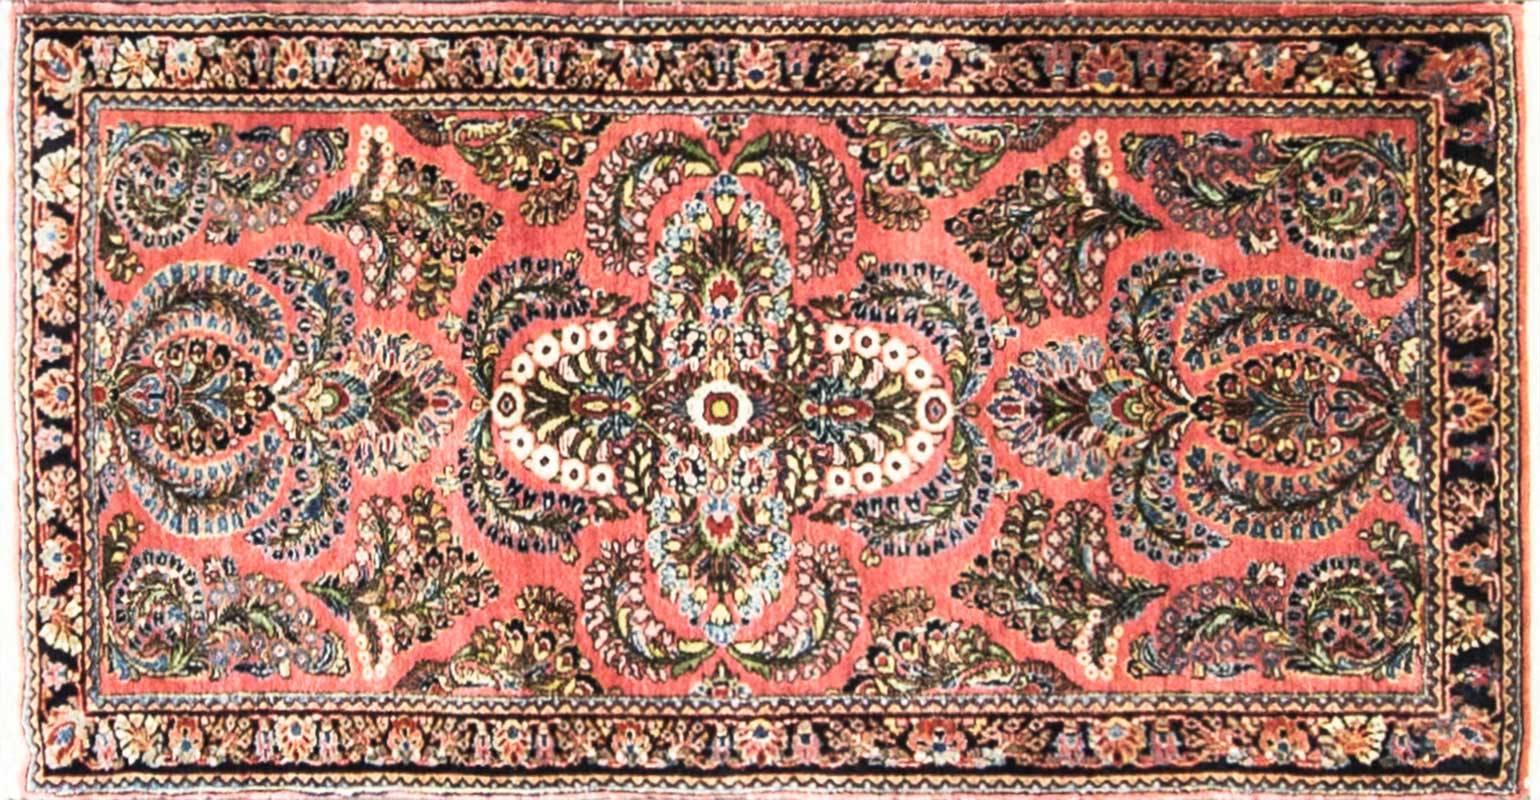 The source of this important provenance has been in the village of Sarouk. North of Arak (formerly Sultanabad). Sarouks are known to be of high quality. The pile is usually higher than the average Persian rug and therefore Sarouks are rather heavy